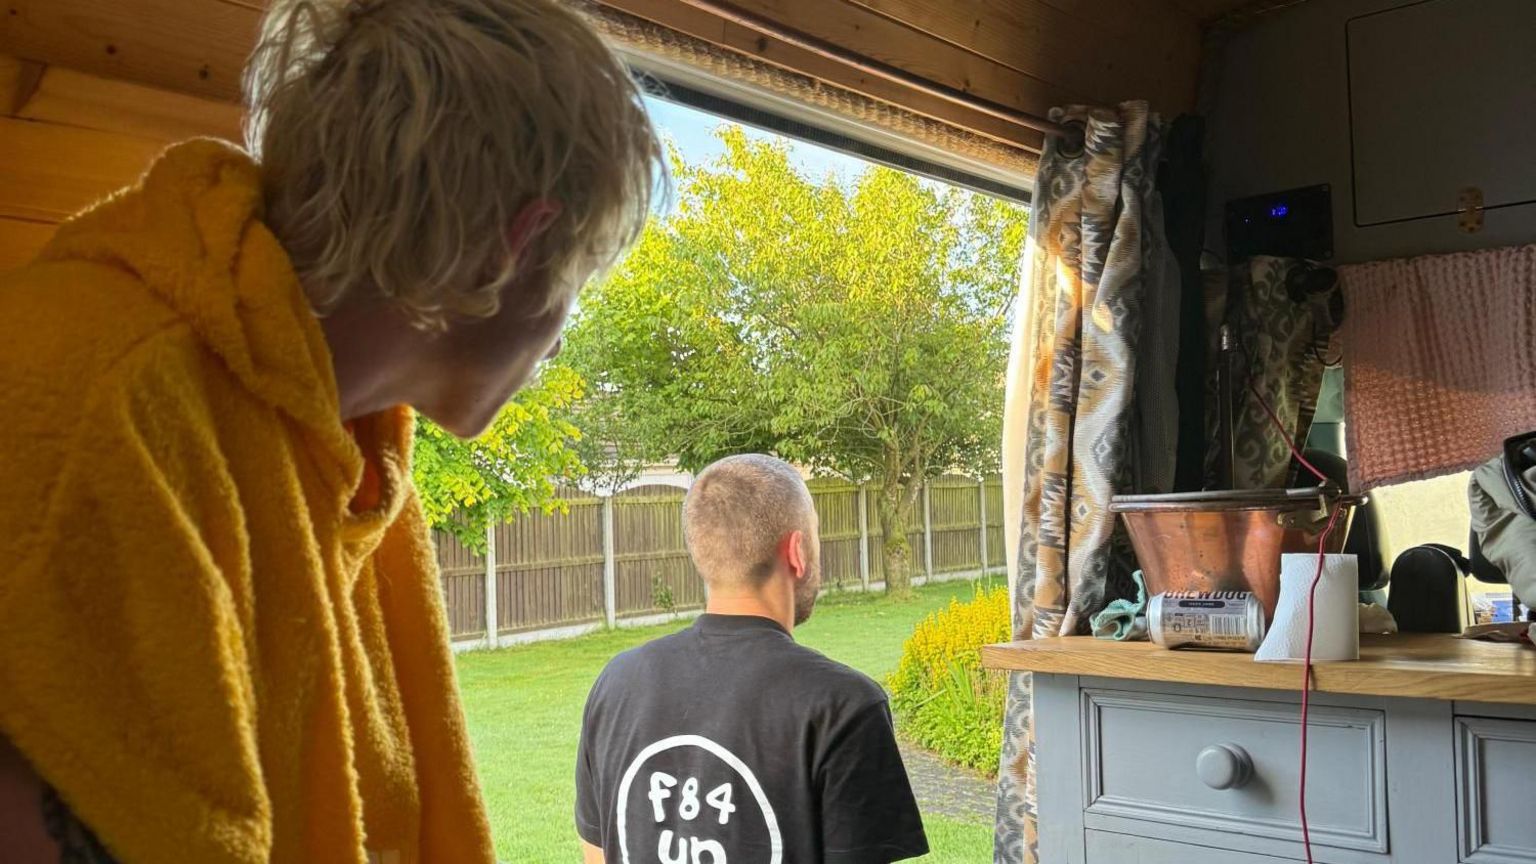 A young man with blonde hair and a yellow dressing gown looks out from the inside of a van